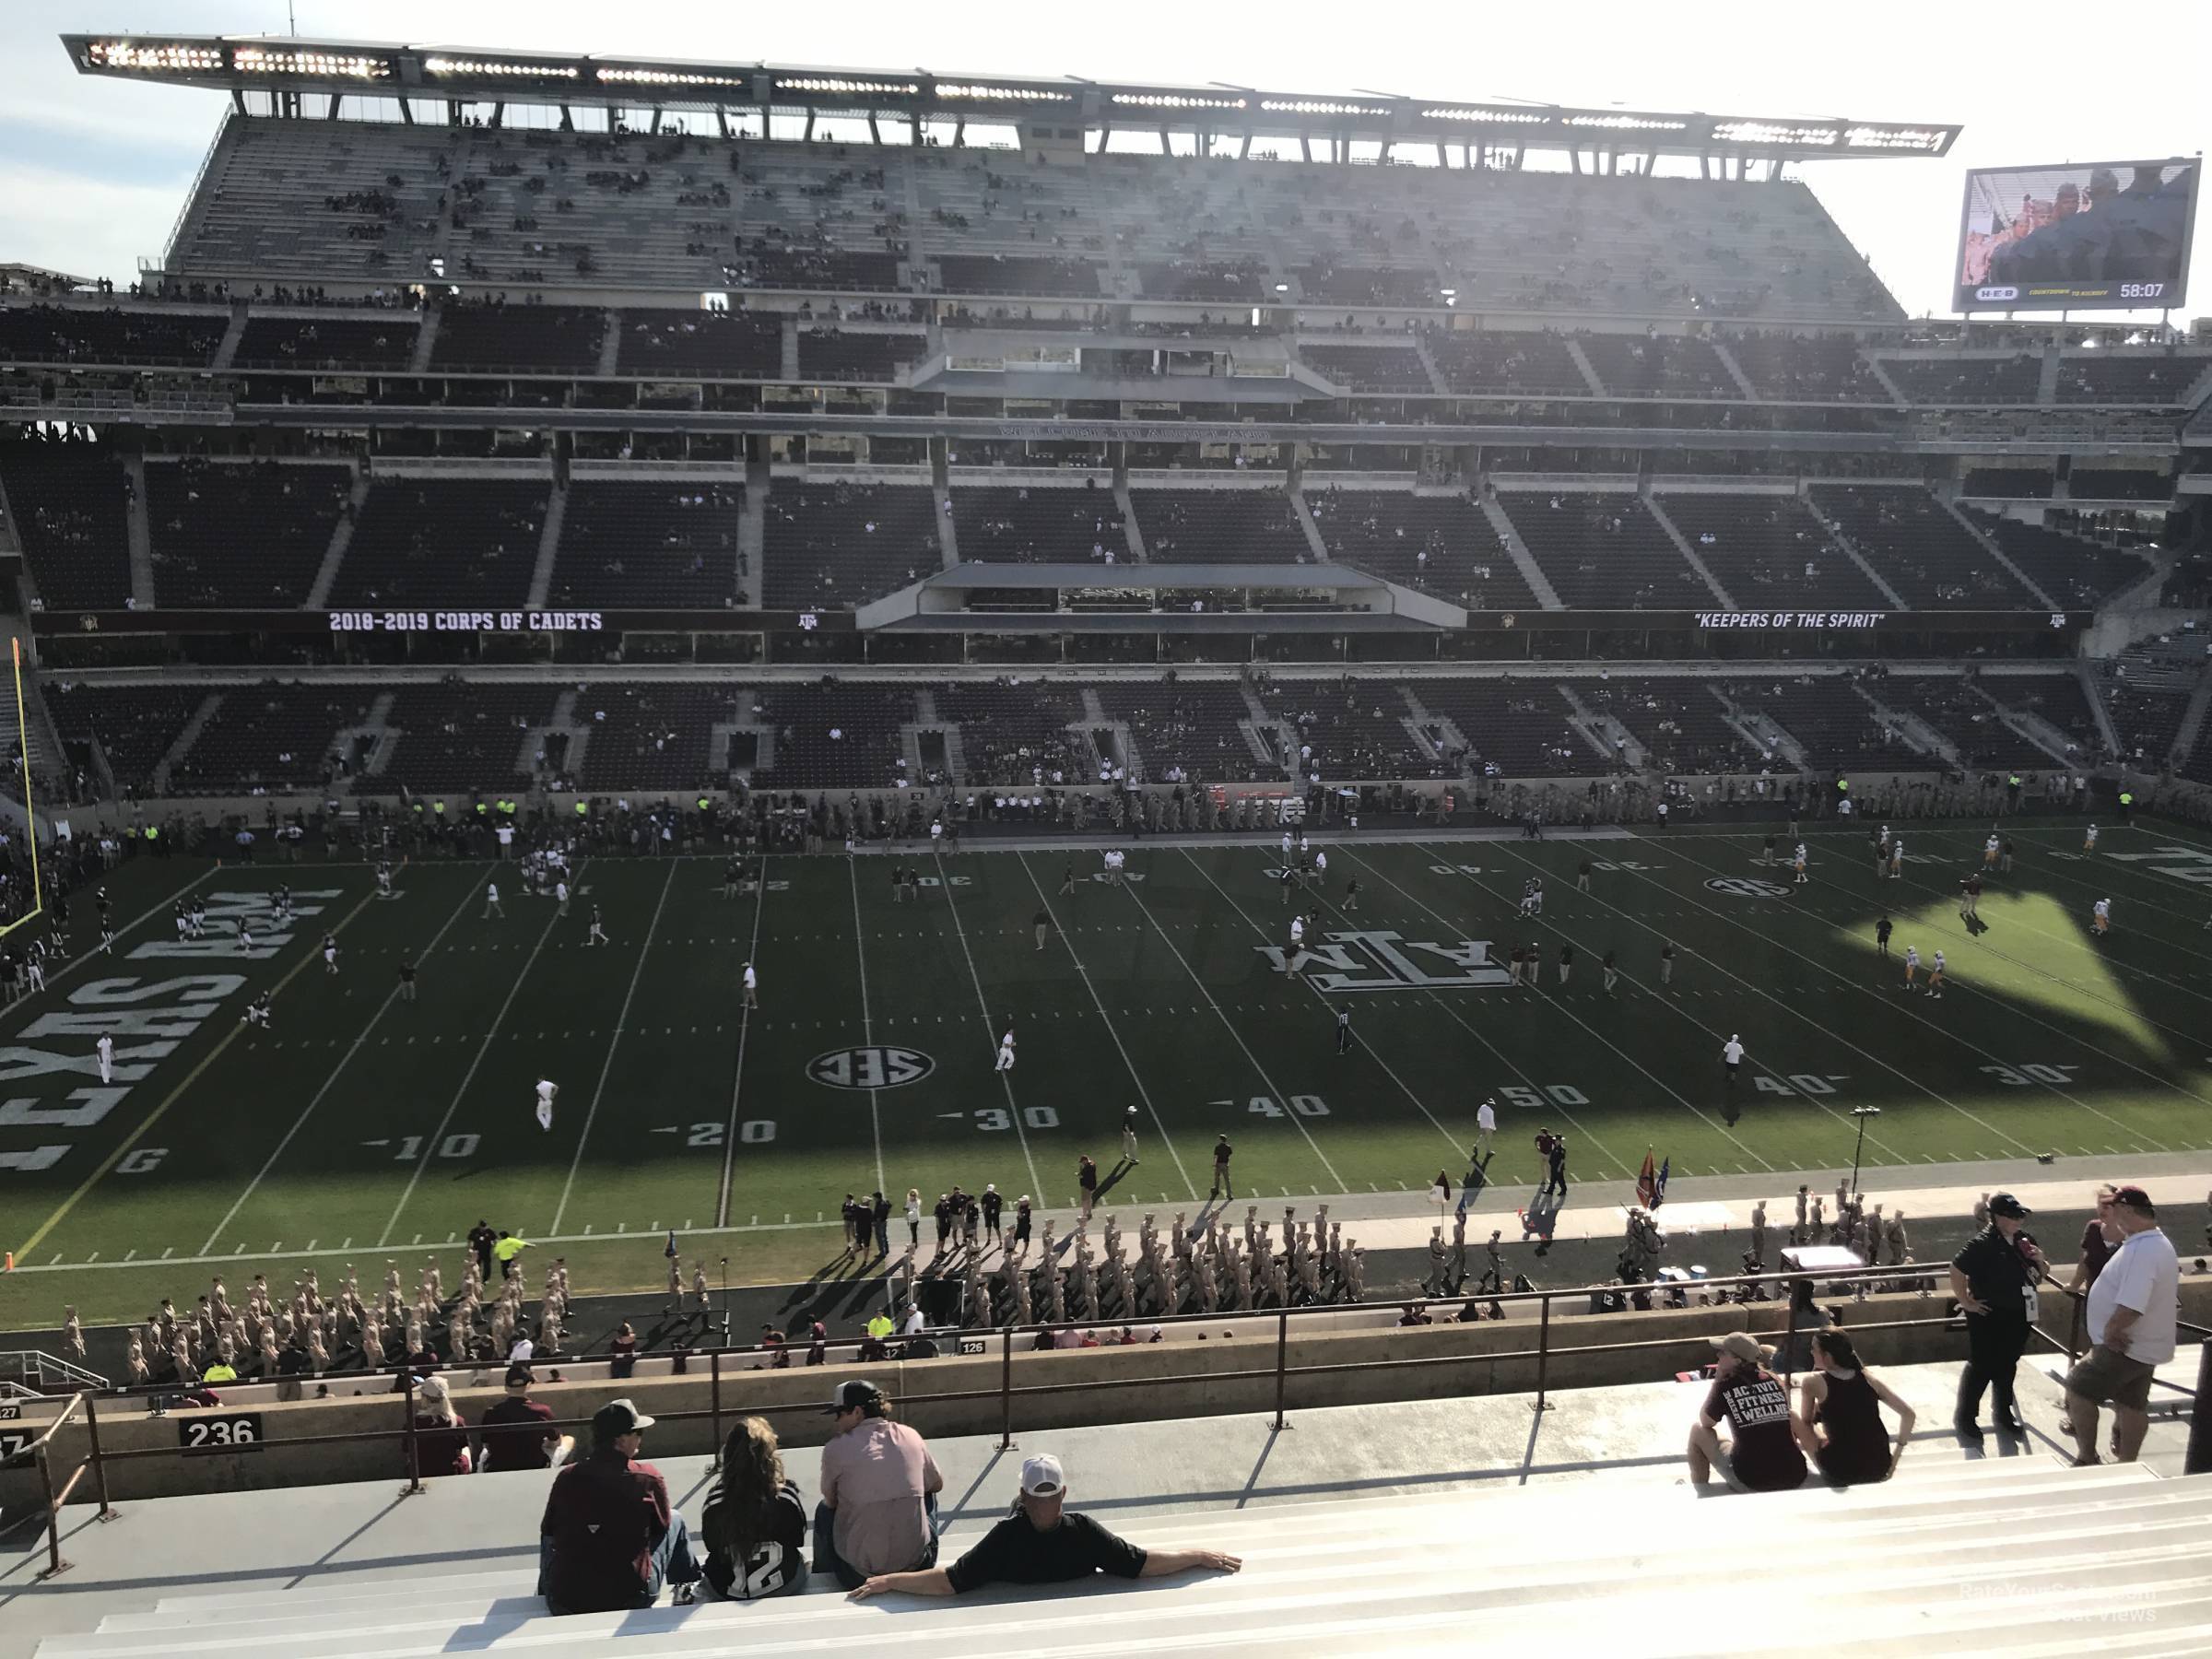 section 236, row 20 seat view  - kyle field